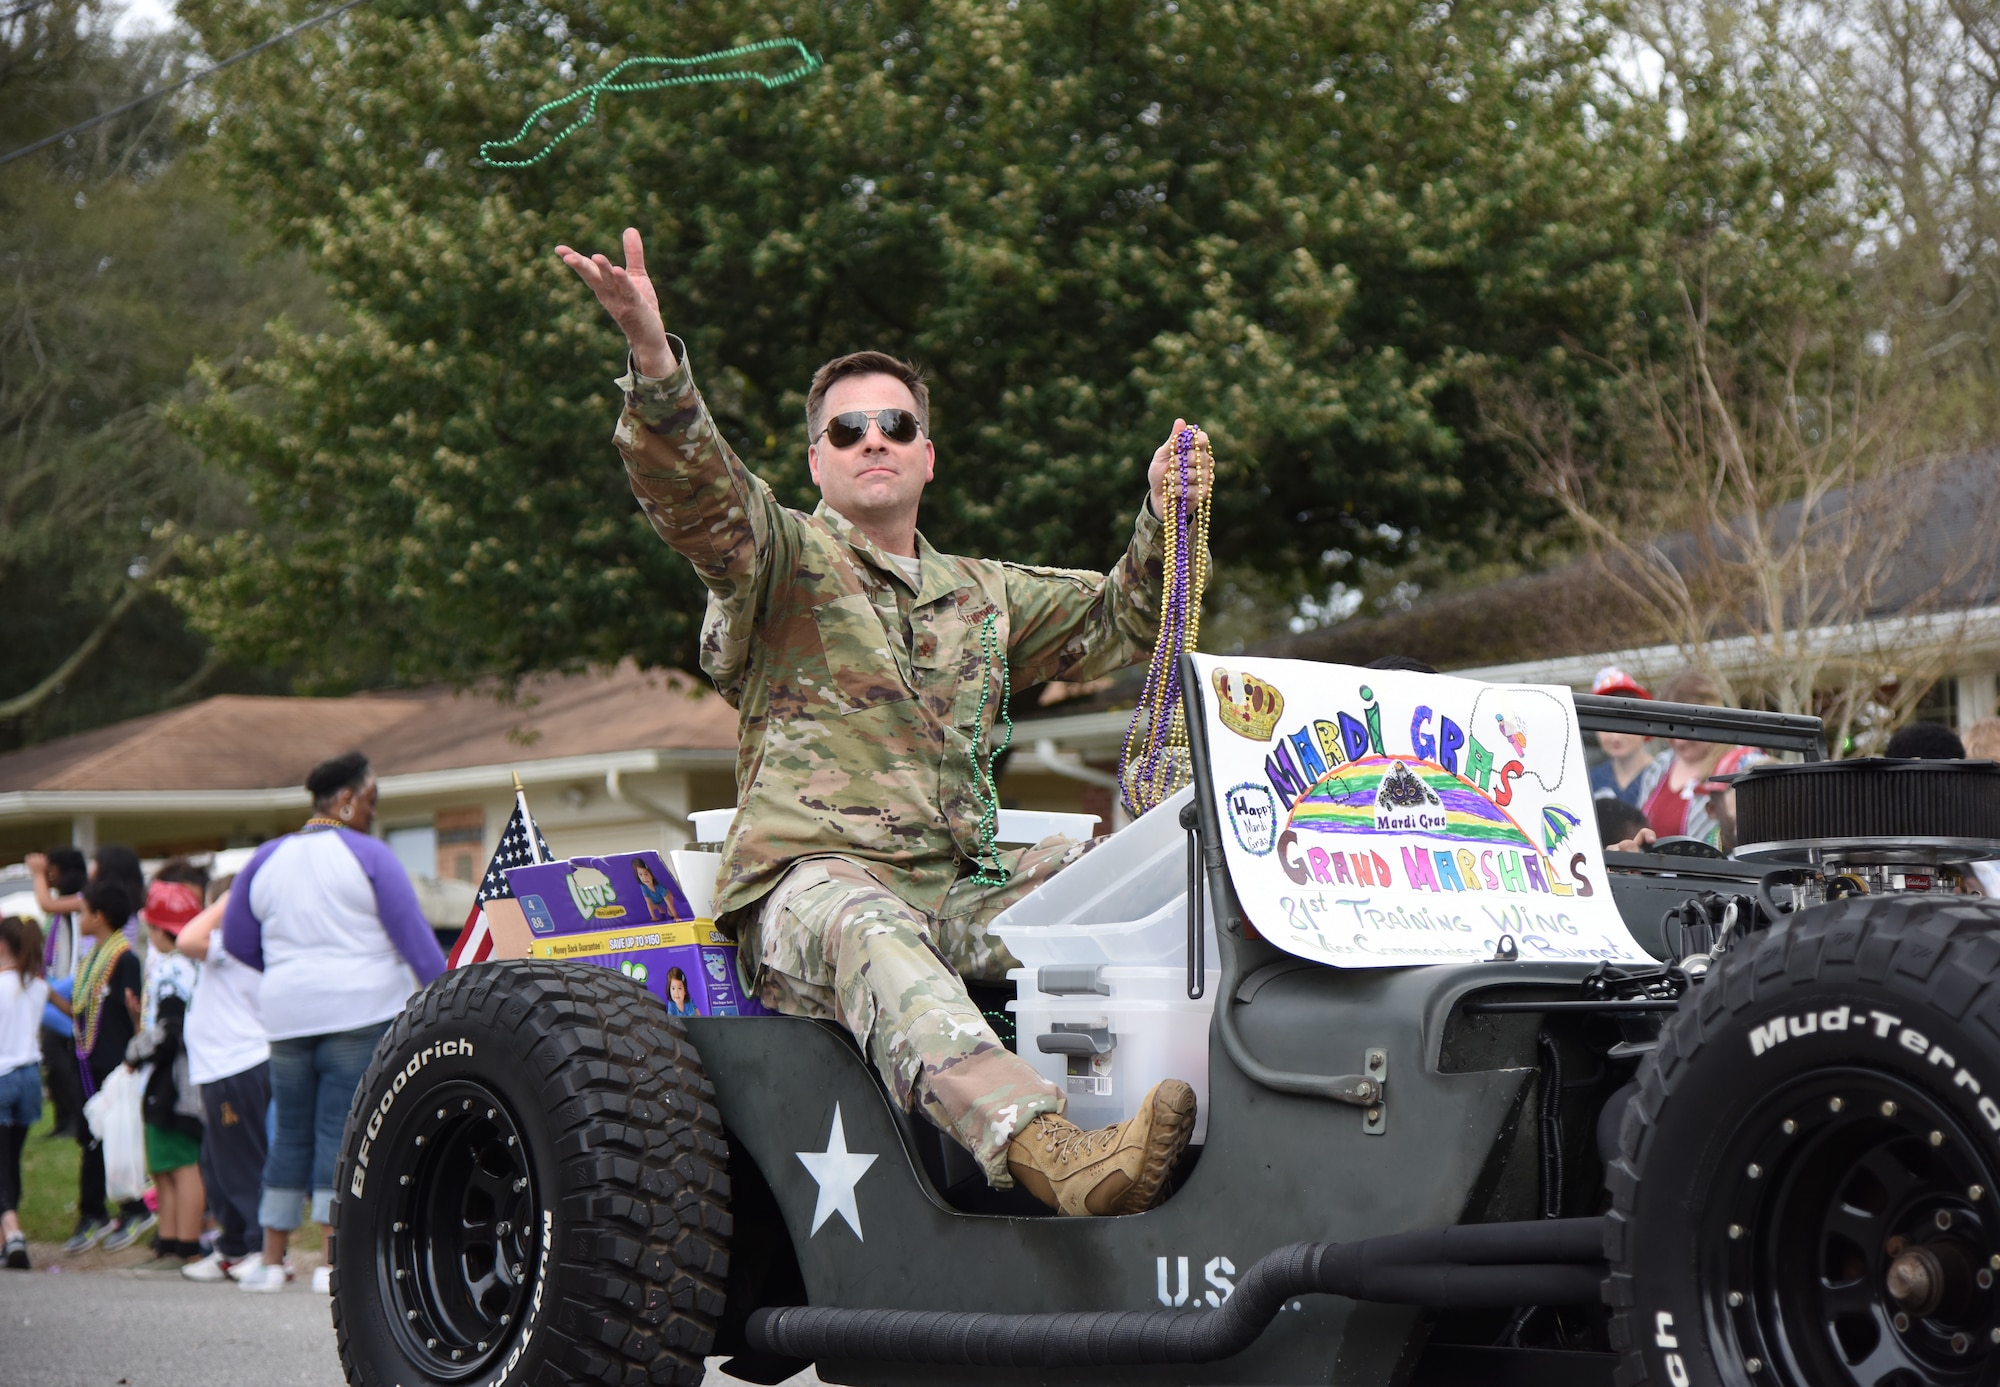 U.S. Air Force Col. Lance Burnett, 81st Training Wing vice commander, tosses beads to children during the Jeff Davis Elementary School Mardi Gras parade in Biloxi, Mississippi, March 1, 2019. Burnett and Chief Master Sgt. Ricardo Russo, Keesler Medical Center superintendent, served as the Grand Marshals while other base personnel also participated in the event. Keesler leadership, Honor Guard and Airmen participated in various festivities throughout the Mardi Gras season, which is celebrated by the local communities. (U.S. Air Force photo by Kemberly Groue)